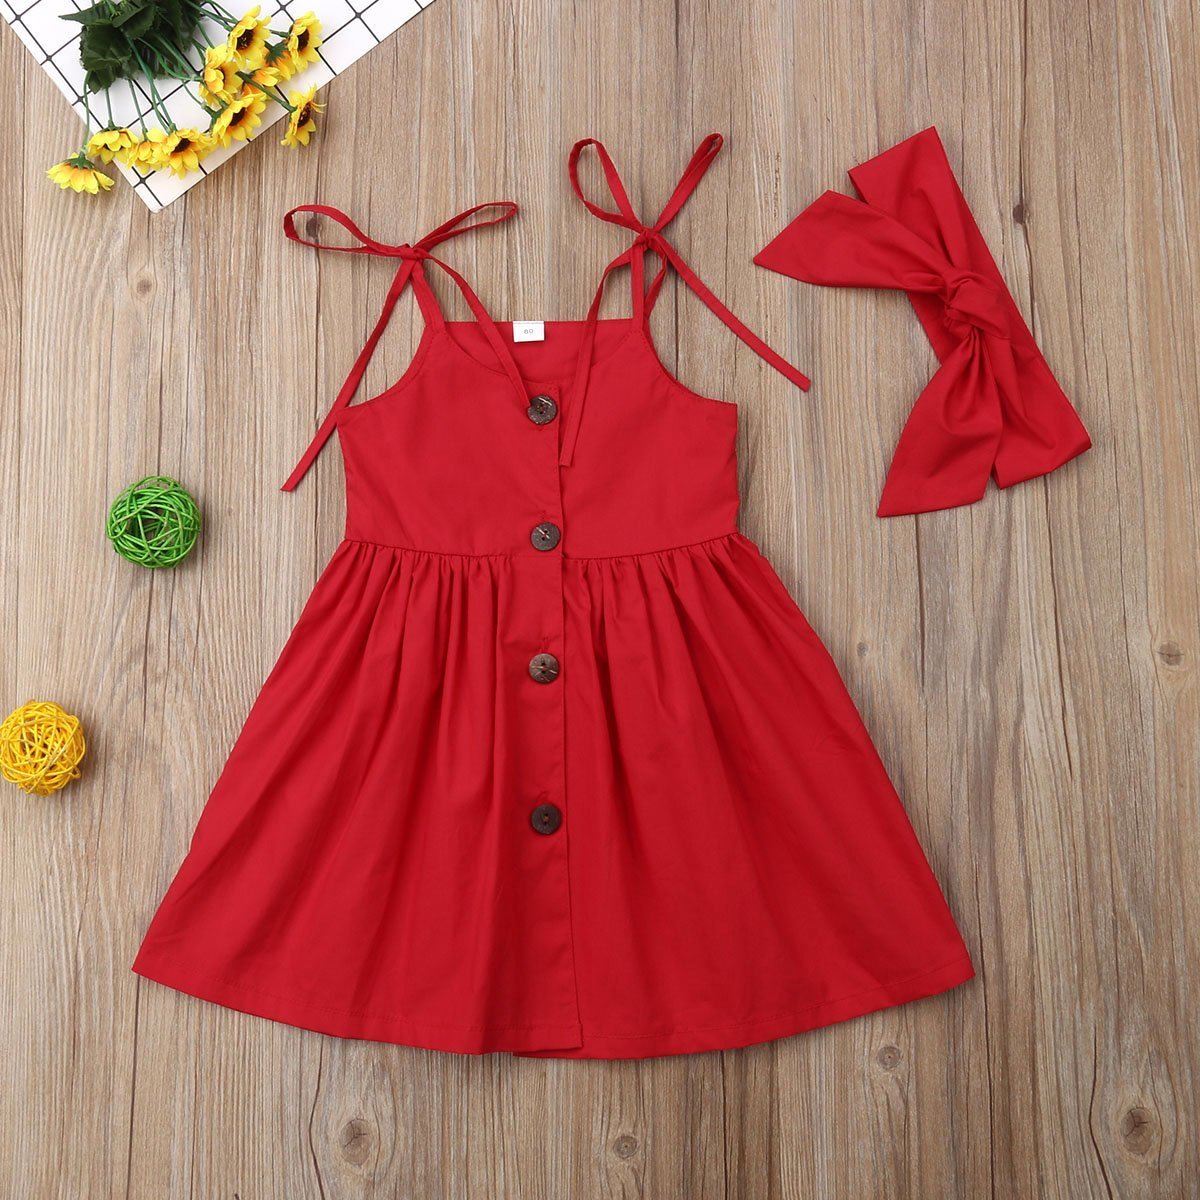 Cute As a Button Dress with Headband (2 Colors)